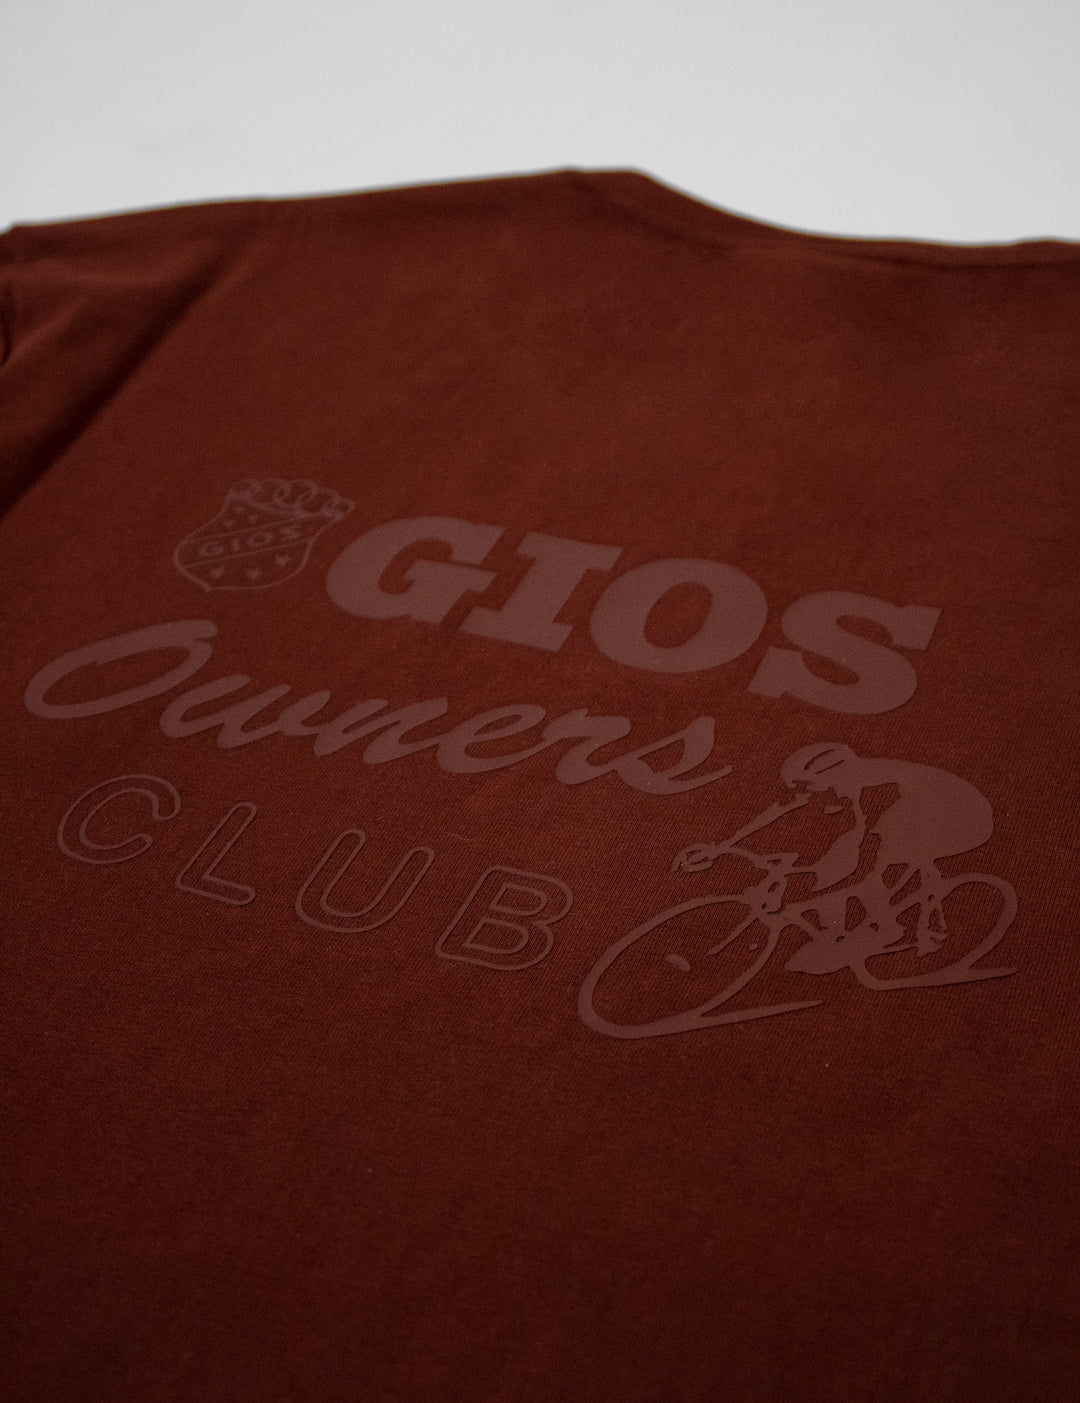 Gios owners club T-shirt